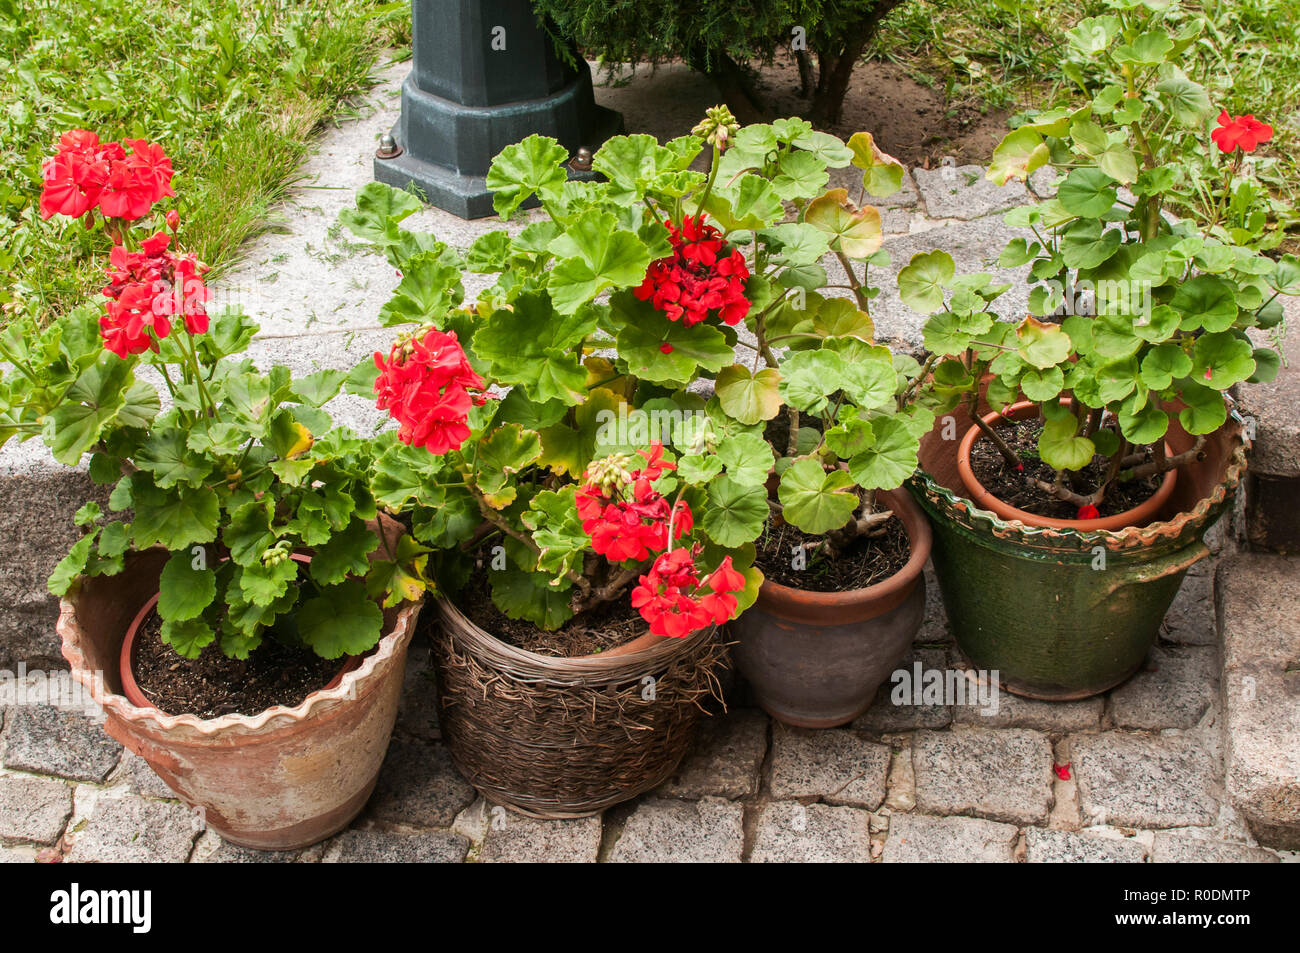 Ceramic pots of red geranium flowers on the stone paving closeup in the garden courtyard Stock Photo